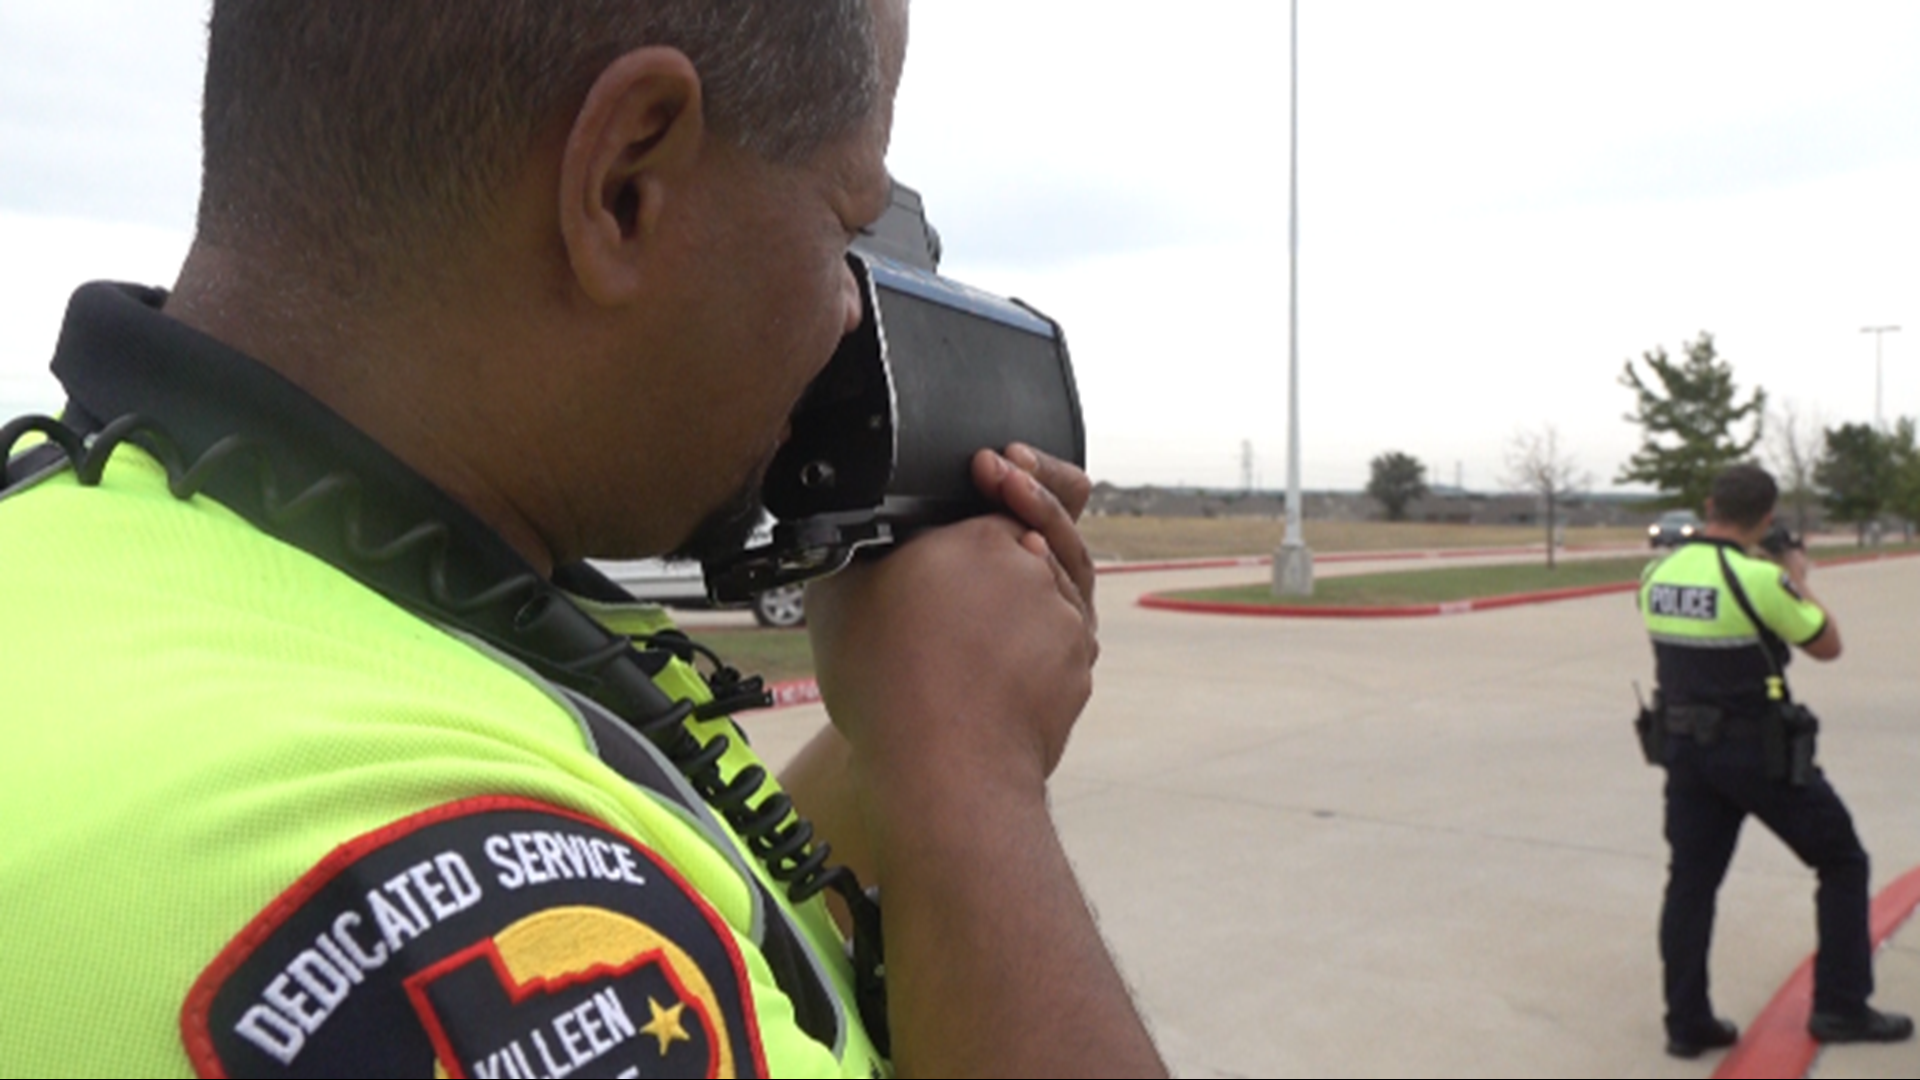 The Killeen Police Department gave out 124 speeding tickets on I-14 in an October enforcement operation. Could grant money help fund a larger crackdown?